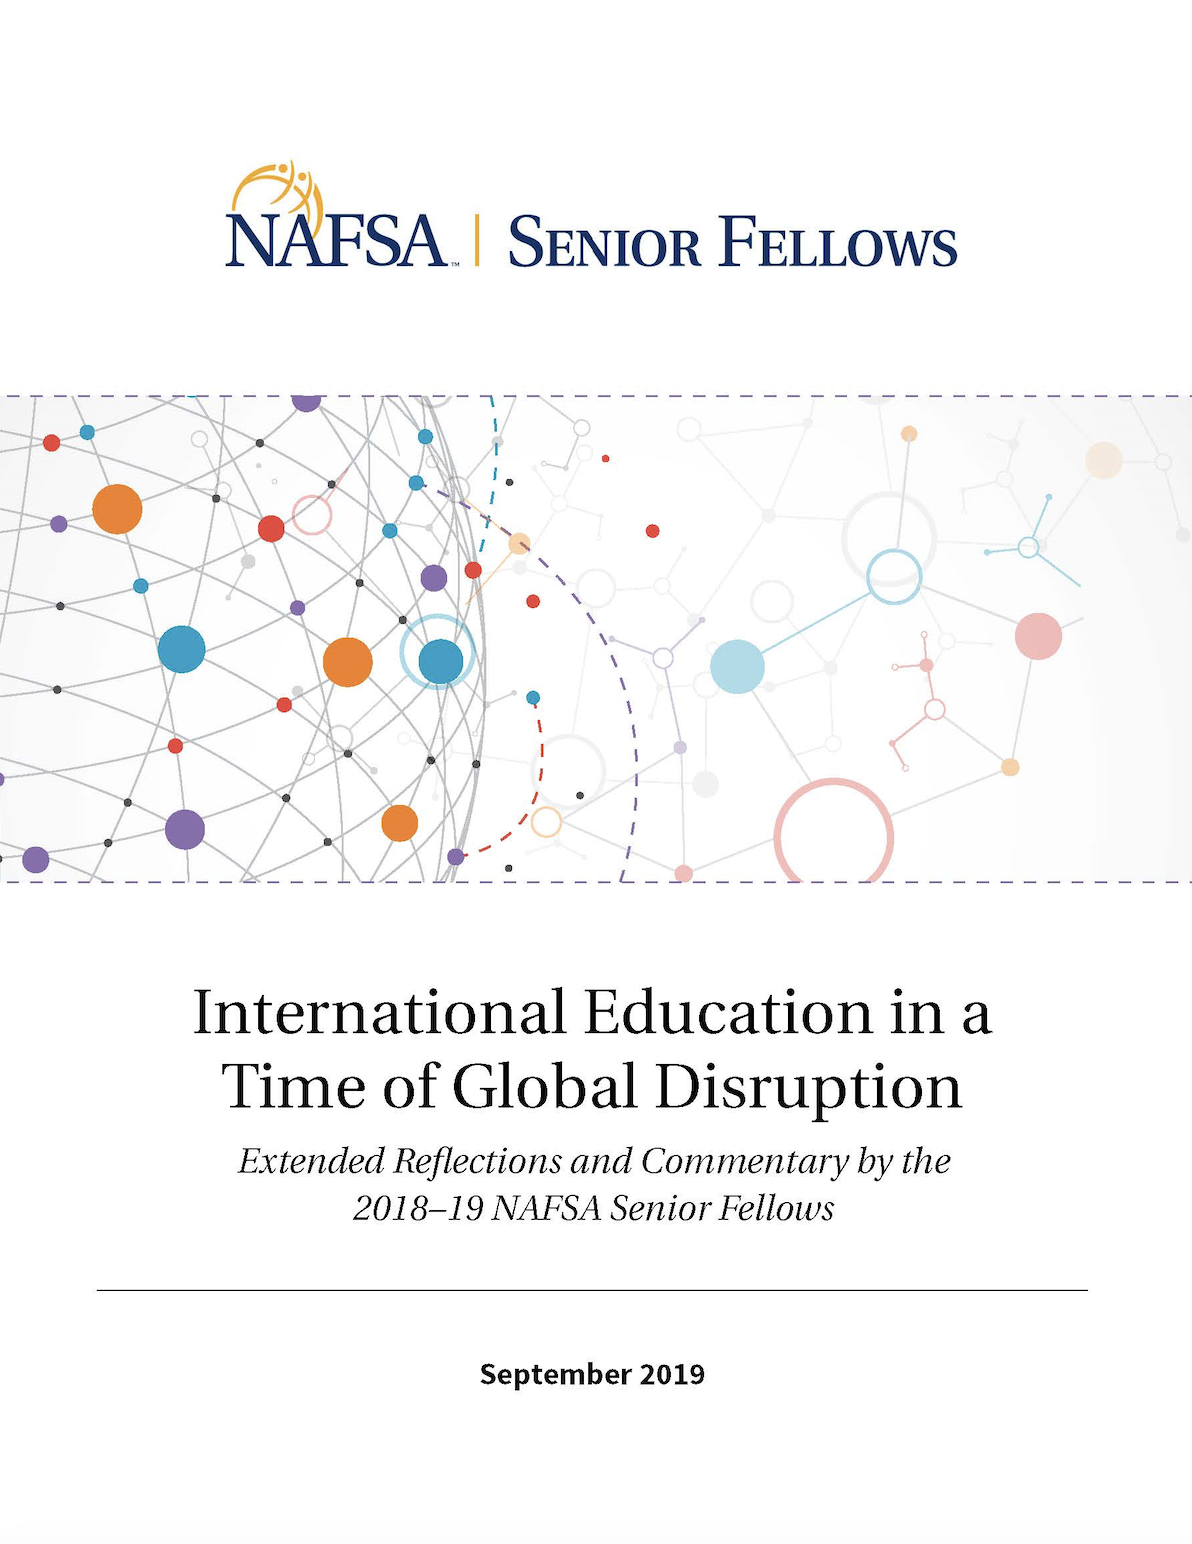 International Education in a Time of Global Disruption cover